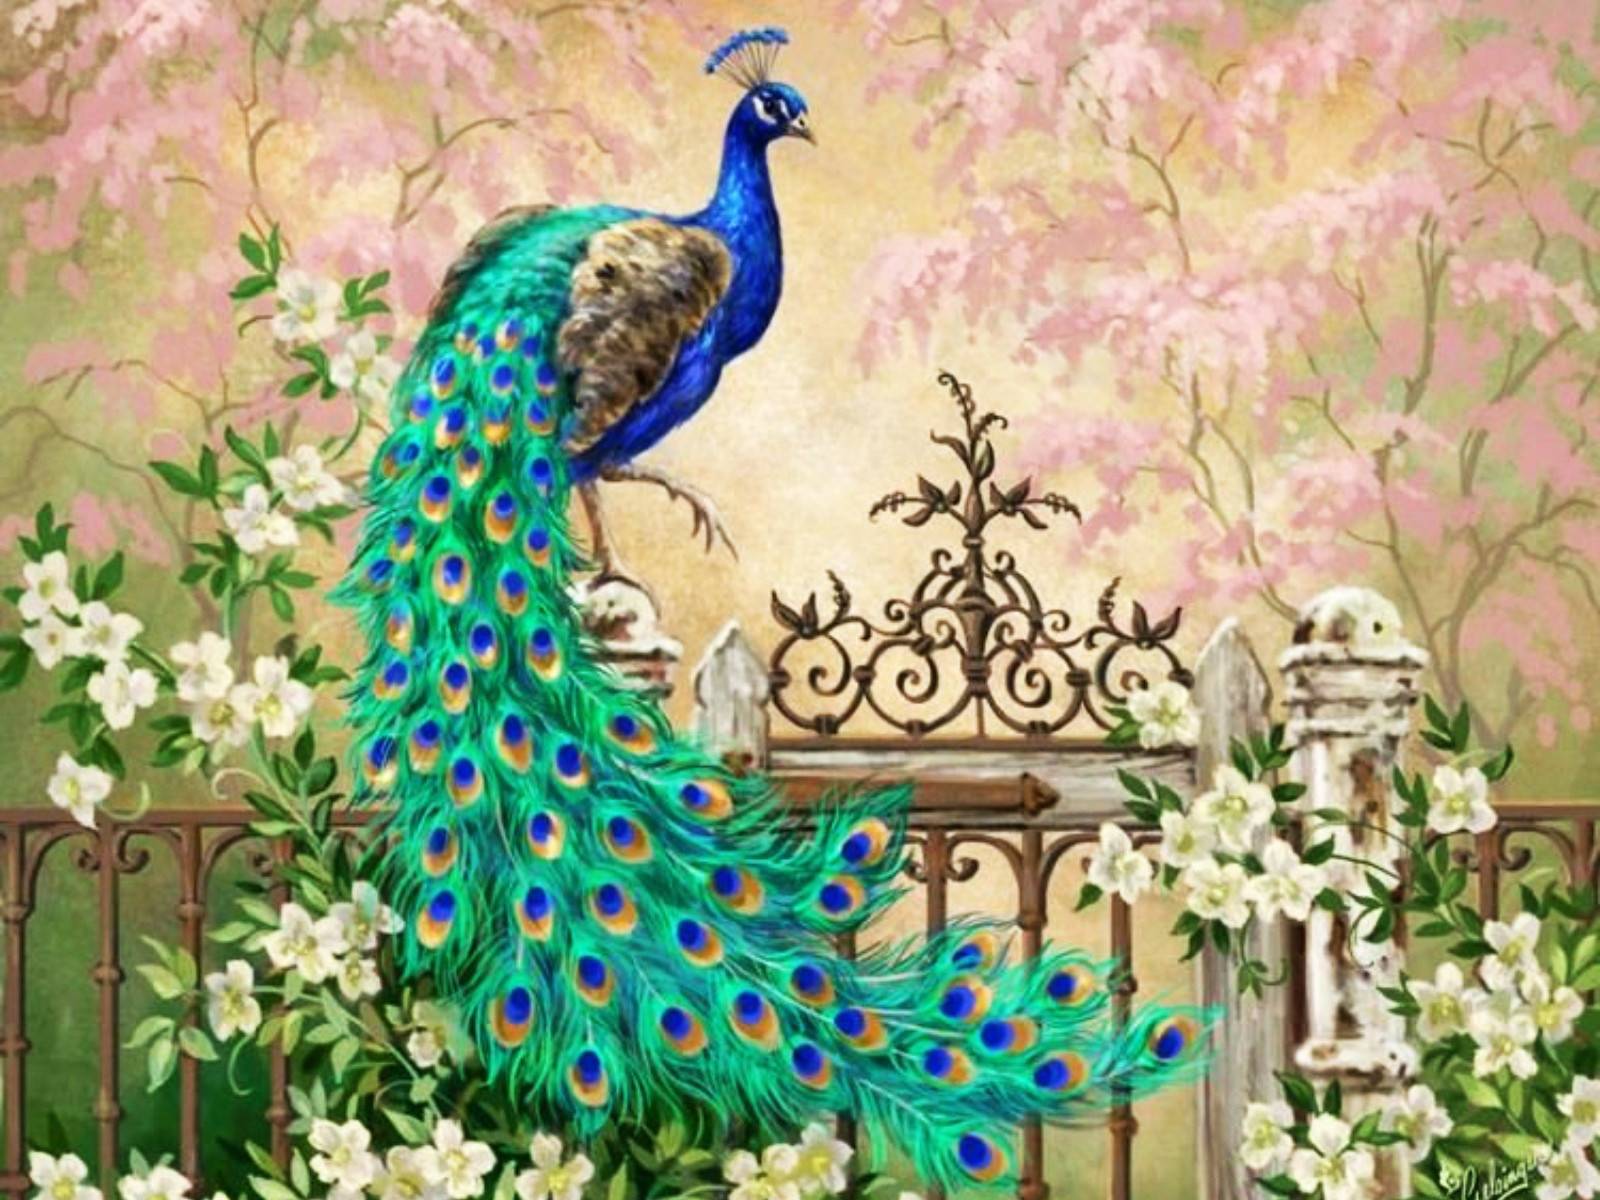 13400 Peacock Art Stock Photos Pictures  RoyaltyFree Images  iStock   Peacock art deco